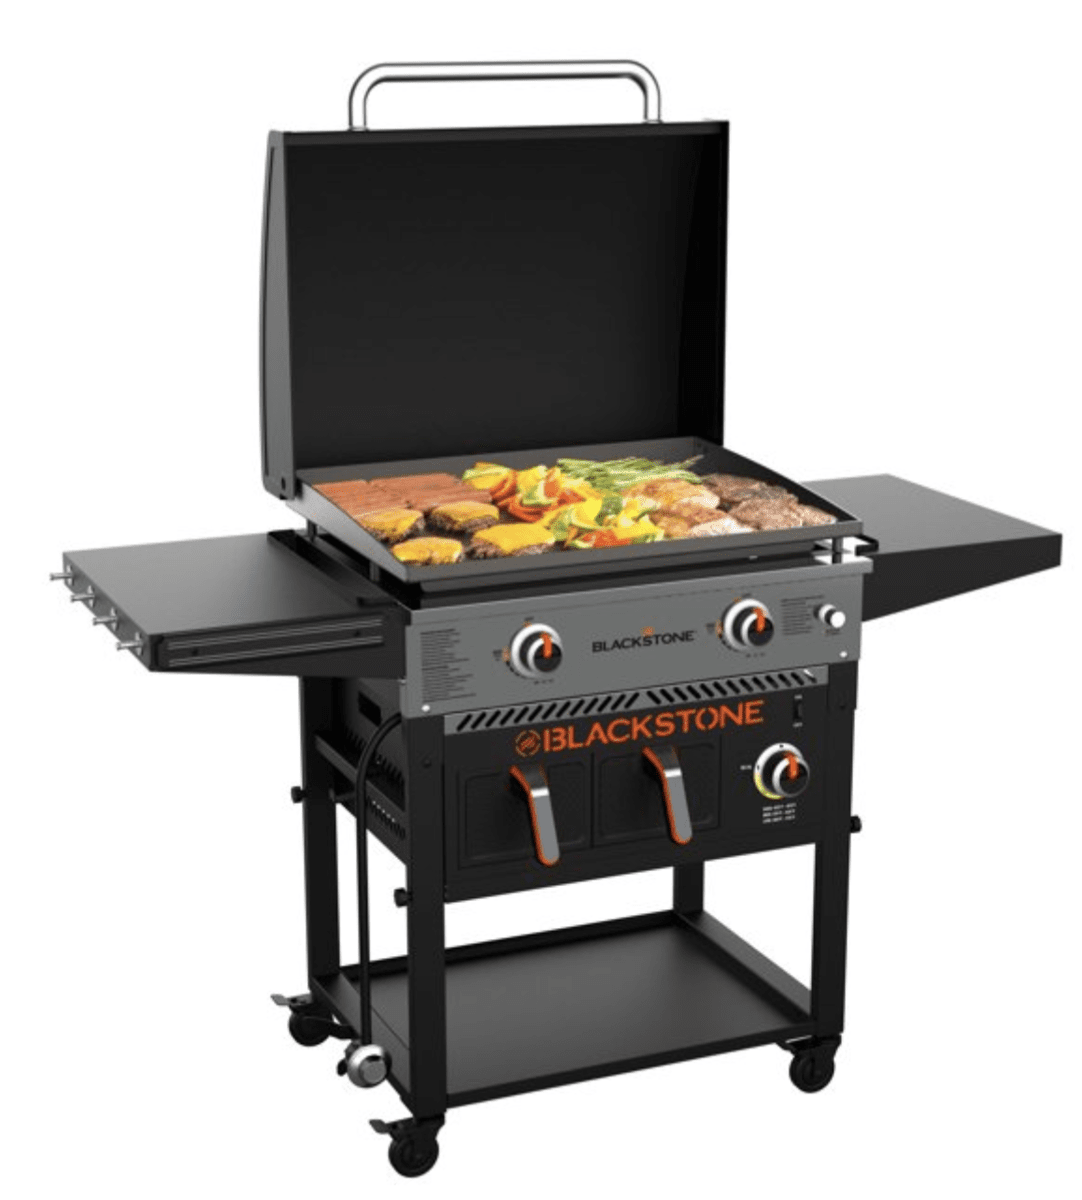 Blackstone Griddle with Air Fryer